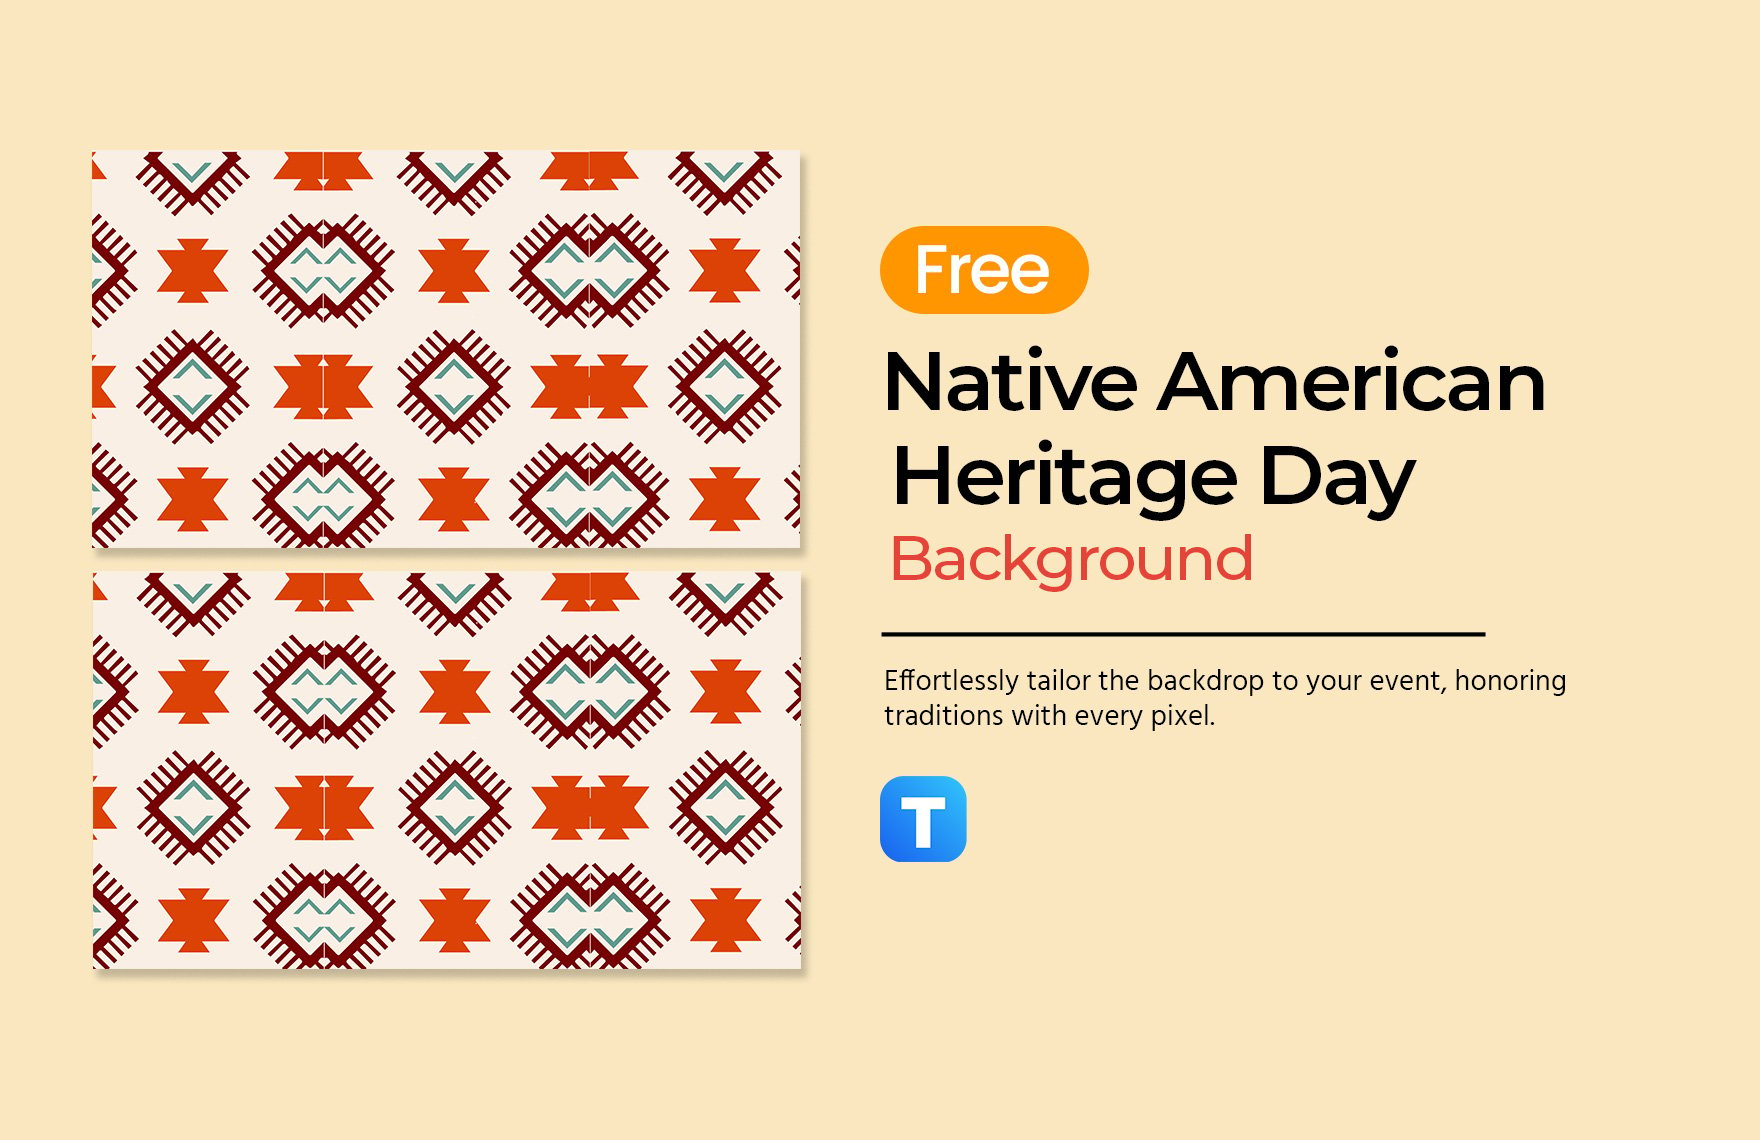 Native American Heritage Day Background